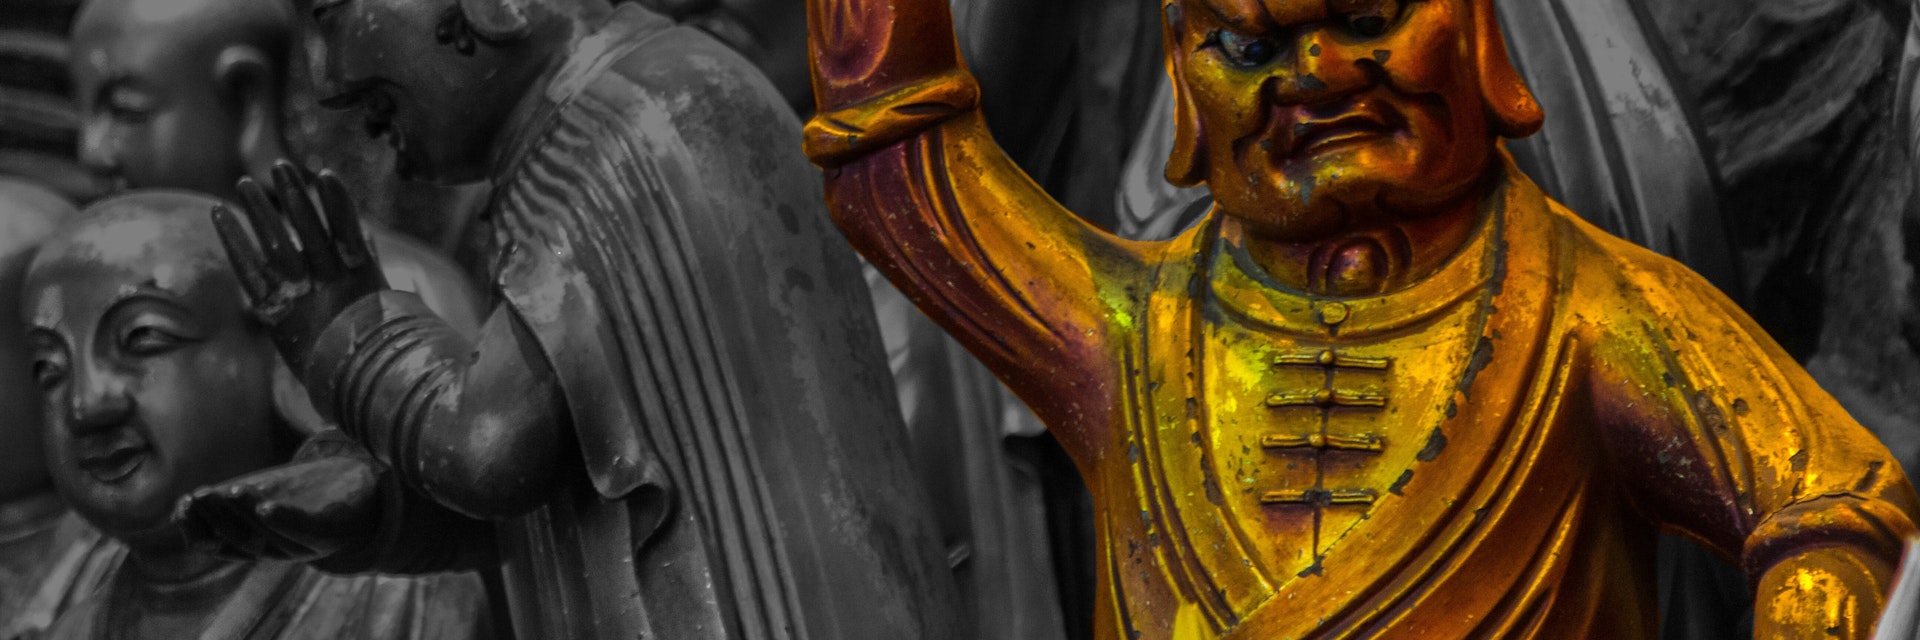 Close-Up Of Gold Male Statue In Jade Buddha Temple